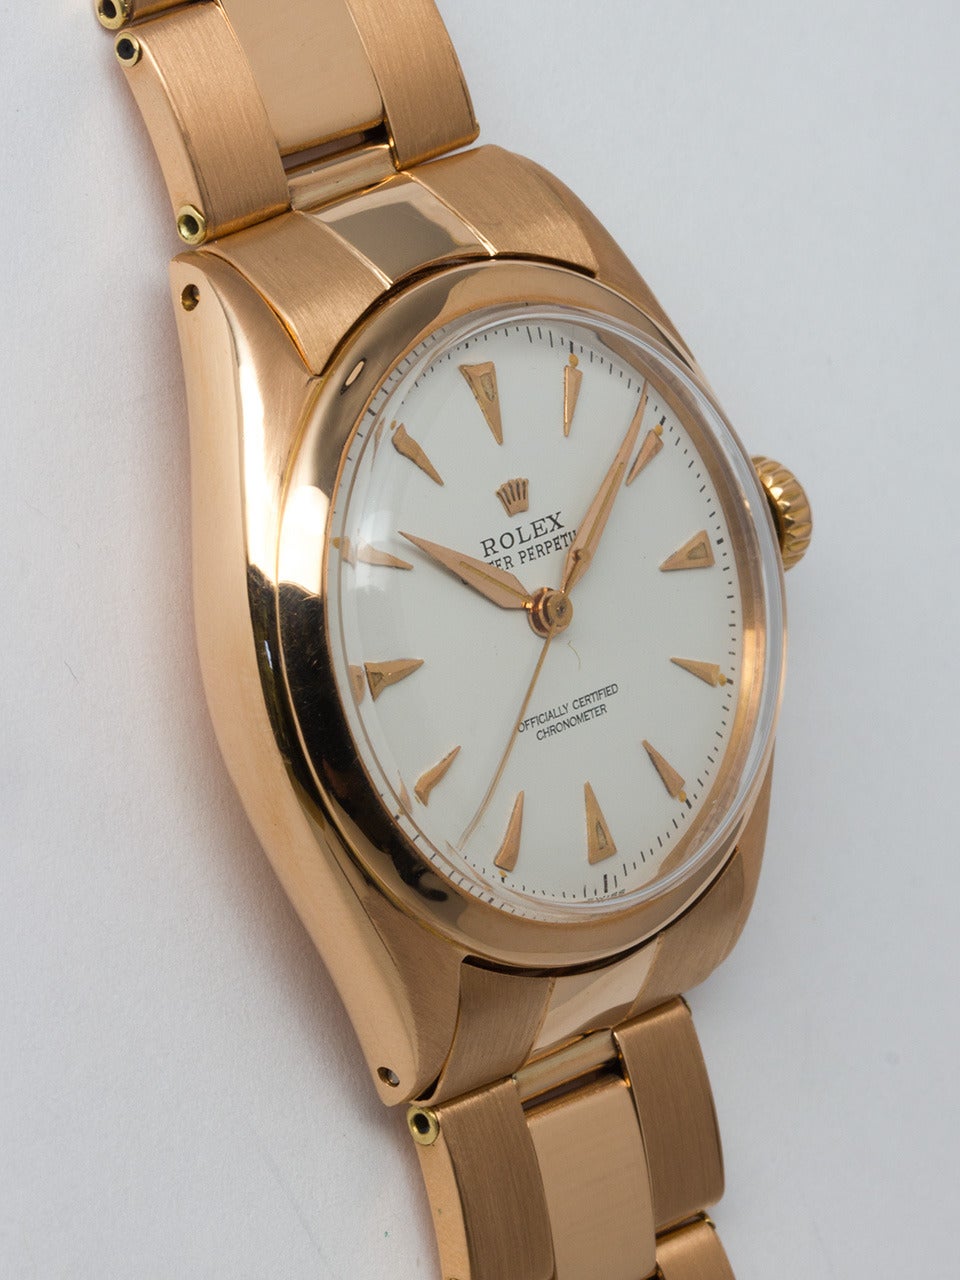 Rolex 18k rose gold Oyster Perpetual wristwatch, Ref. 6085, circa 1958. 34mm case with smooth bezel and acrylic crystal. Beautifully restored white dial with raised dagger indexes with luminous pink alpha hands. Self-winding calibre A260 movement